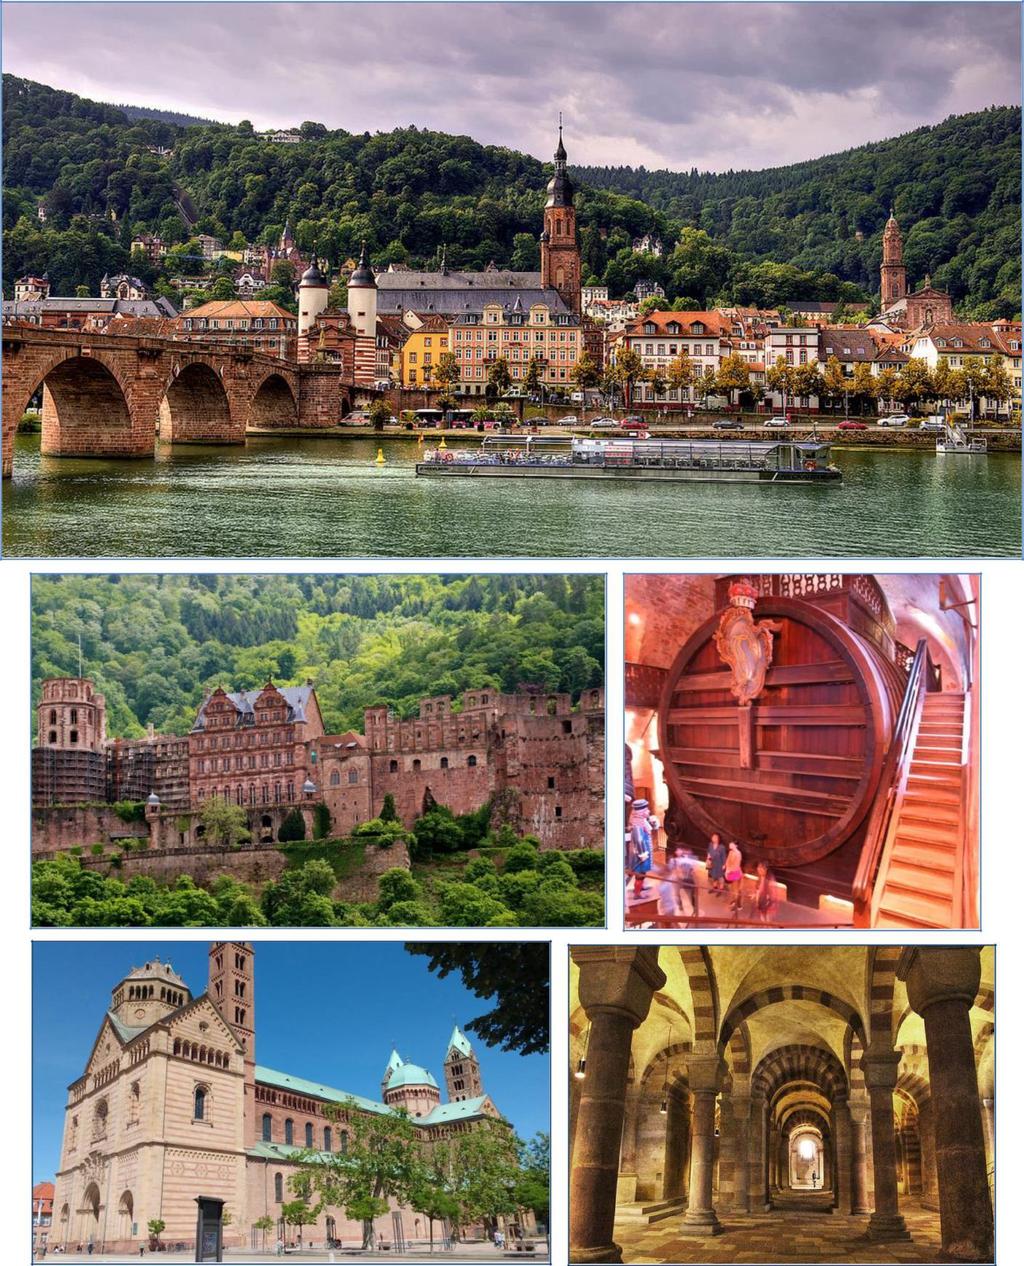 Day 6, Tuesday, October 2: Speyer Excursion to Heidelberg Enjoy a leisurely morning in Speyer, one of Germany s oldest cities, and explore the town at your own pace.